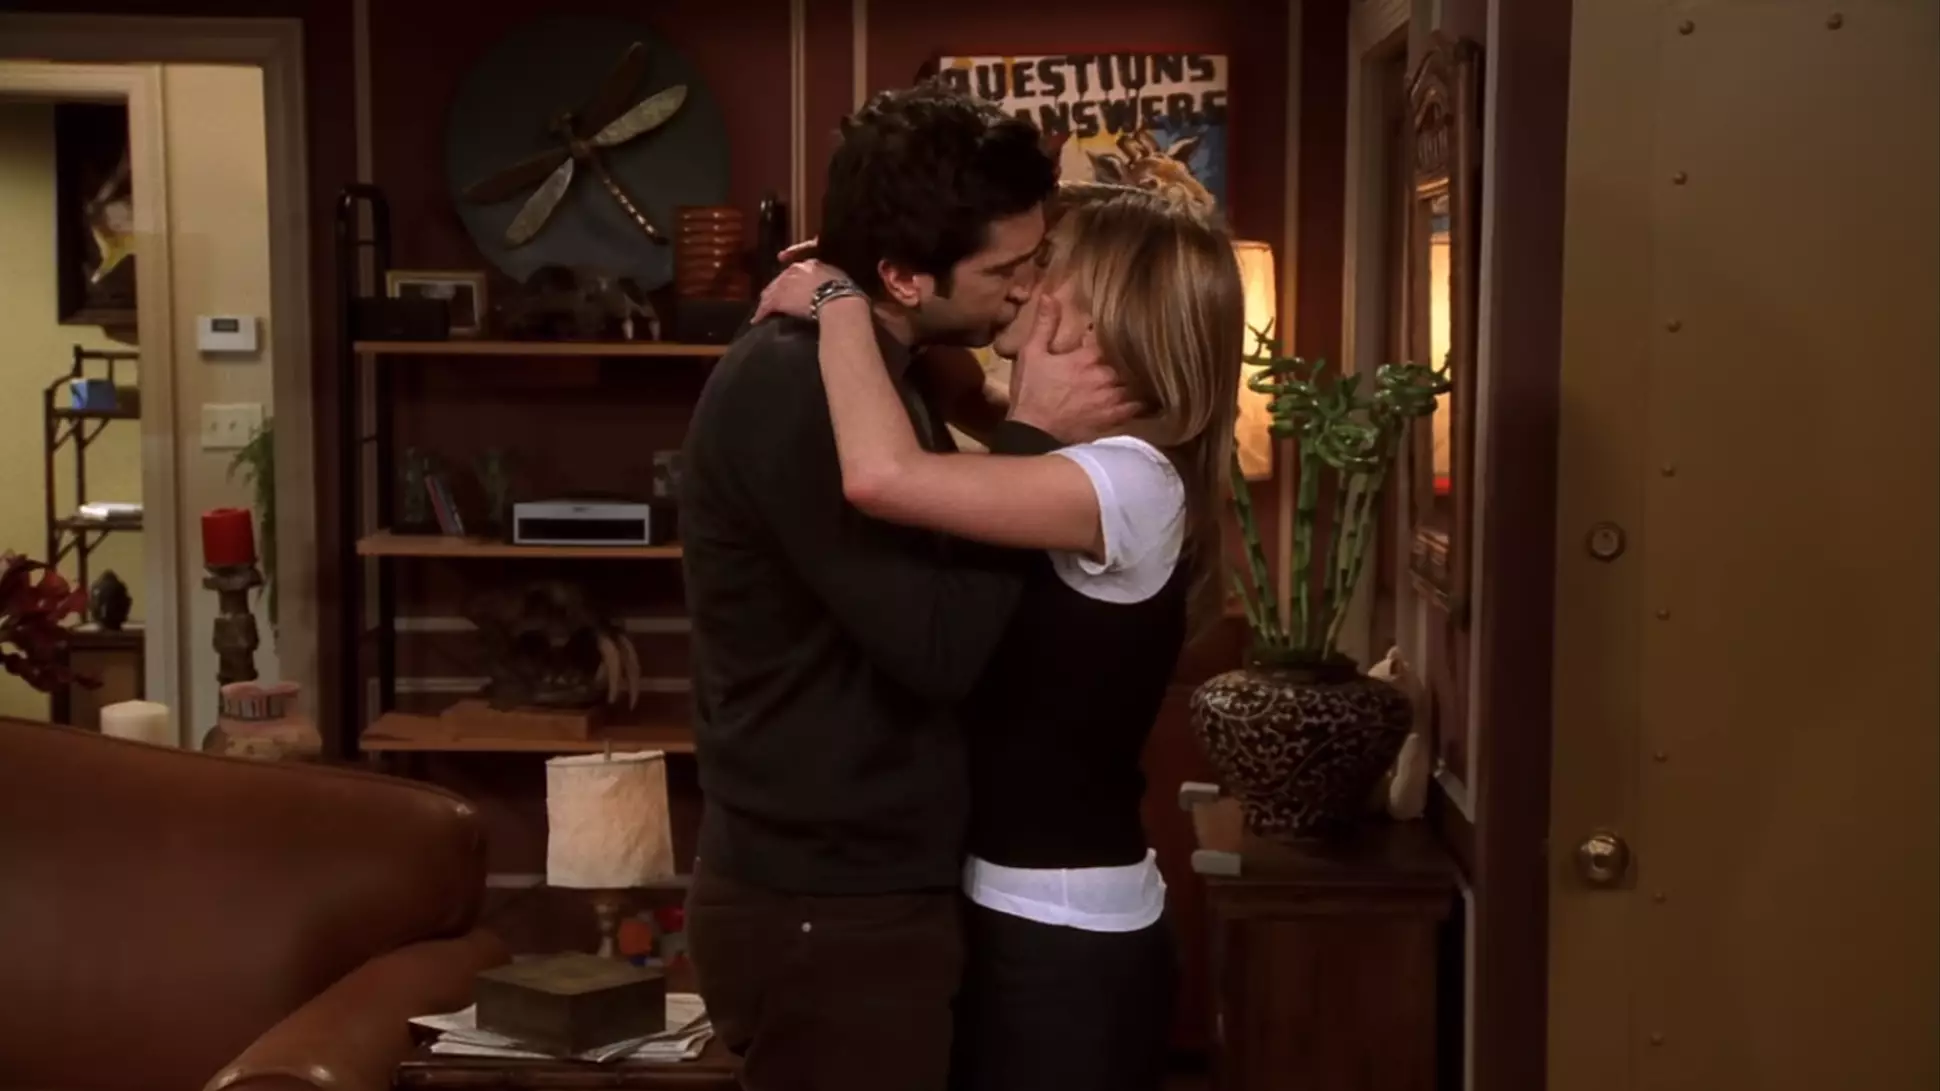 An Unearthed 'Friends' Script Has Revealed Ross Could've Gone To Paris With Rachel